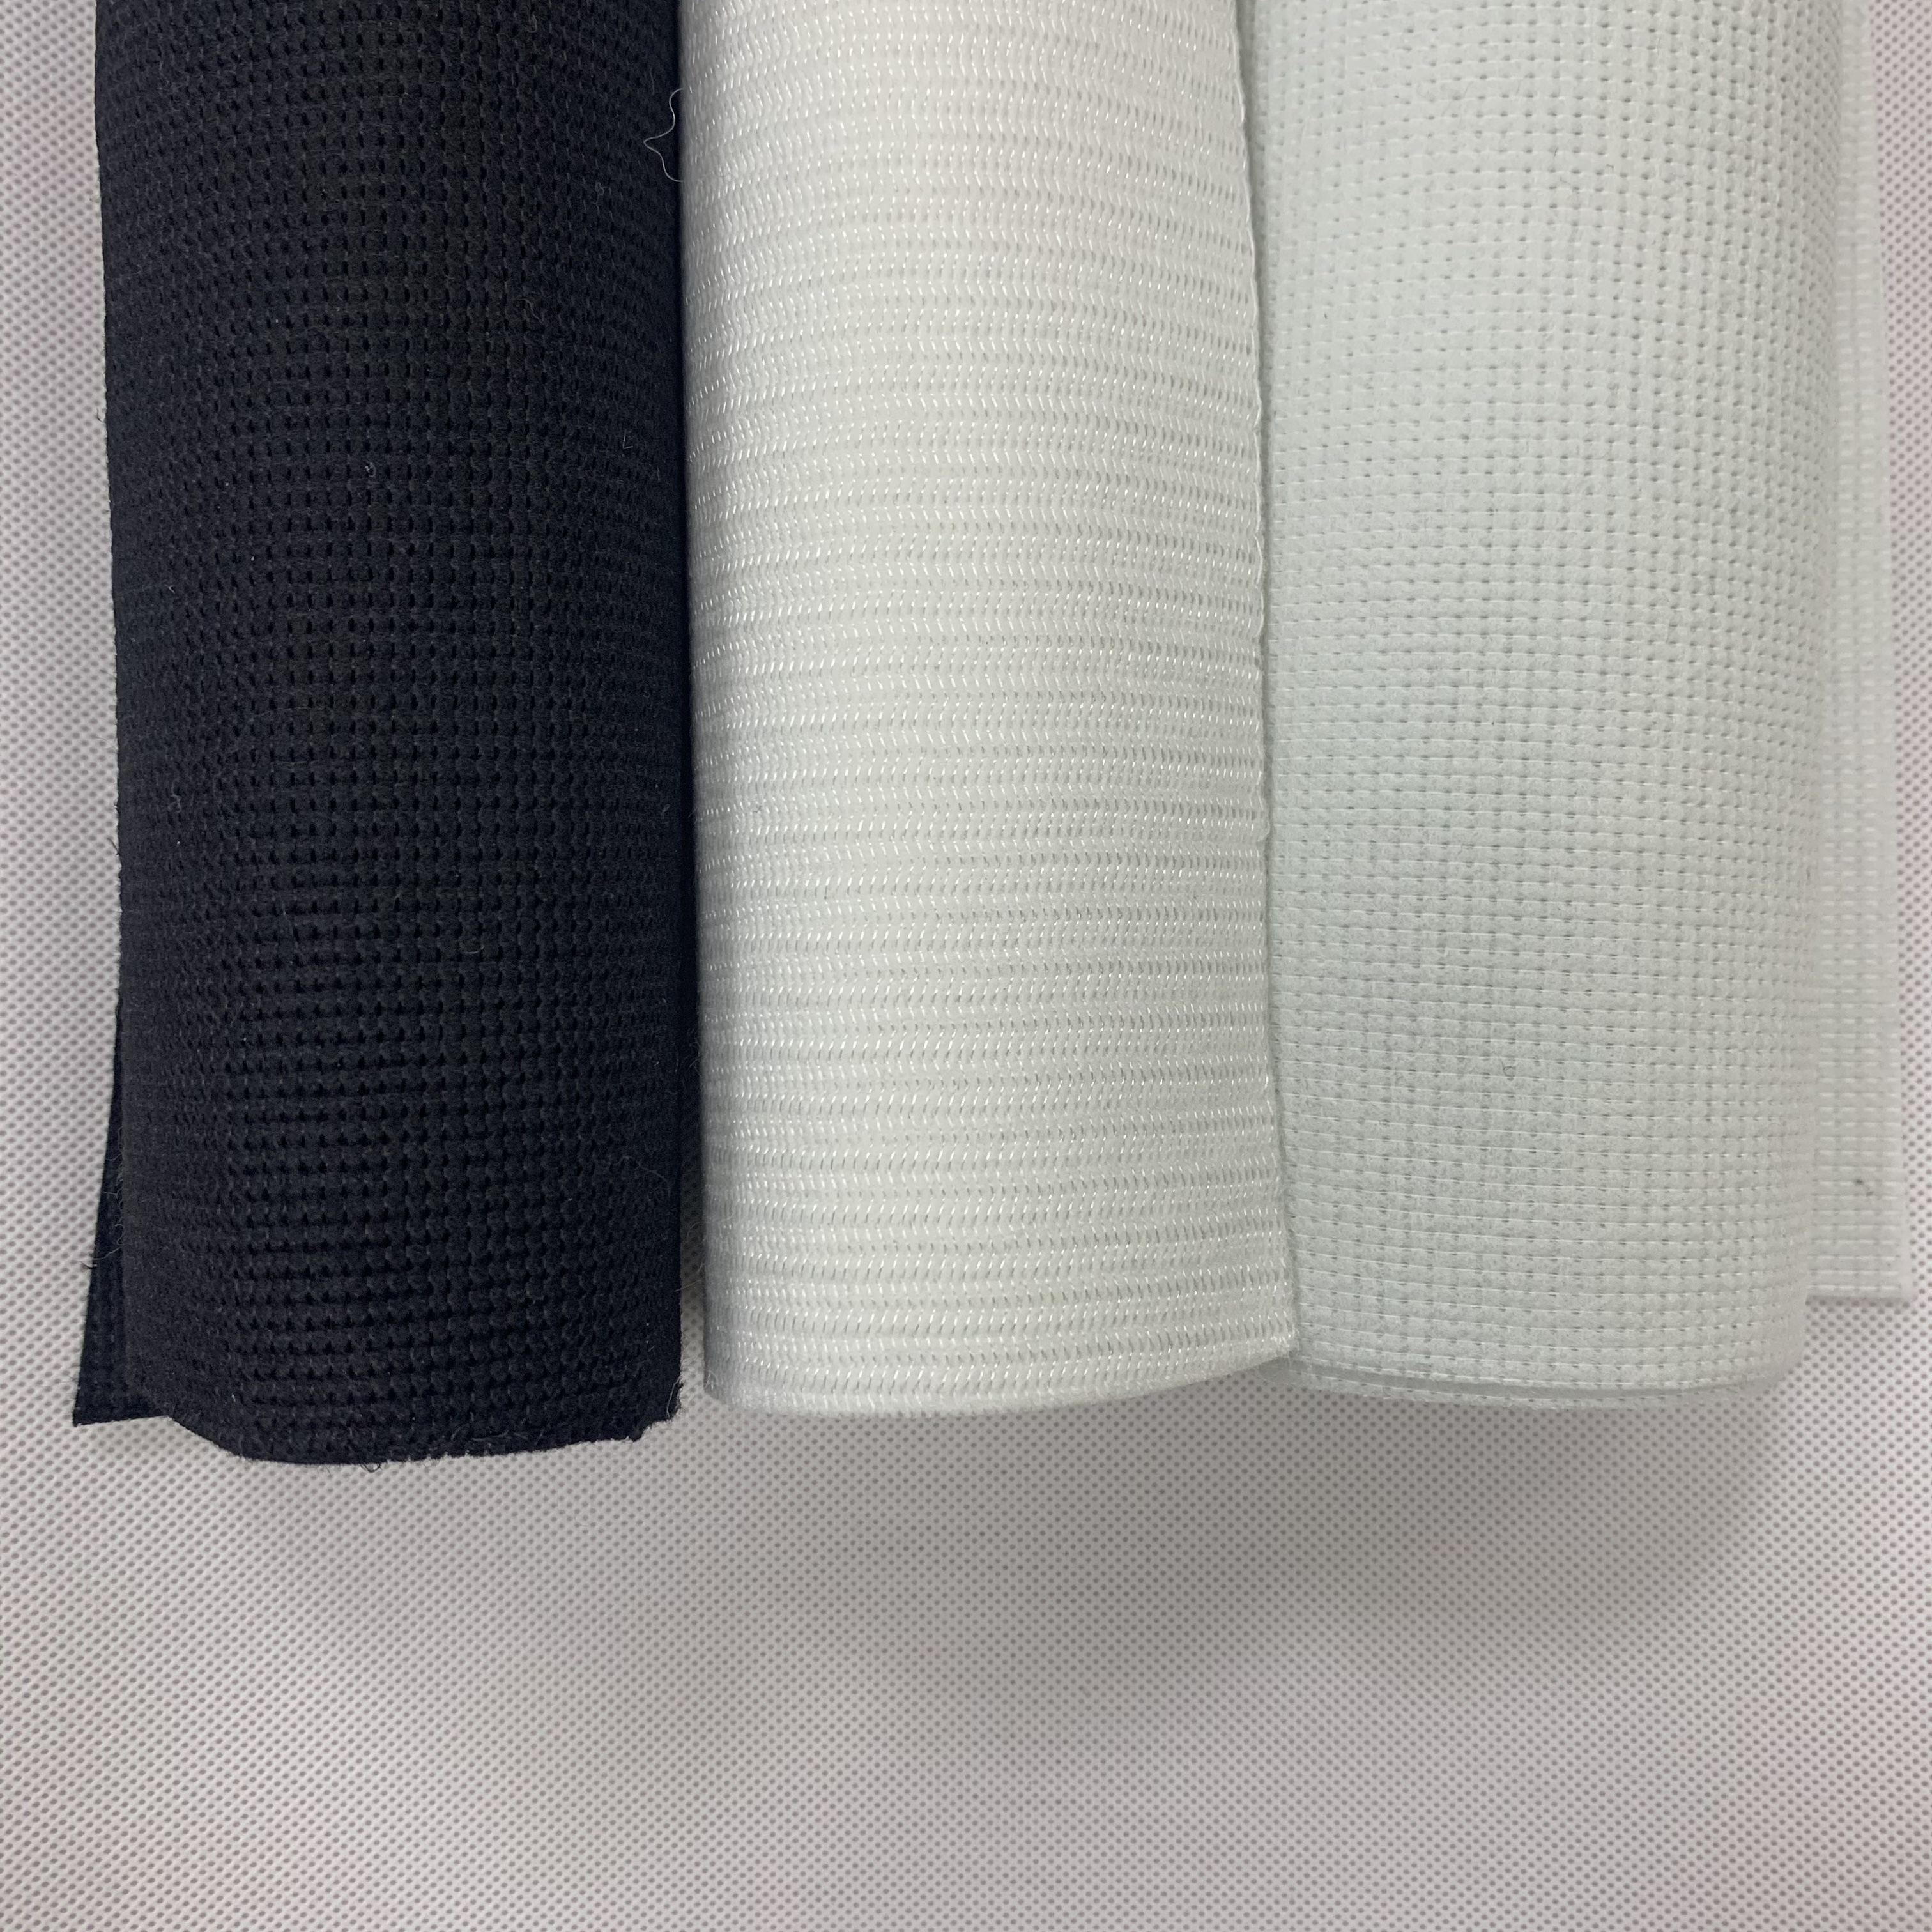 100% fabric non woven Stitchbond nonwoven for package/bag/decorate